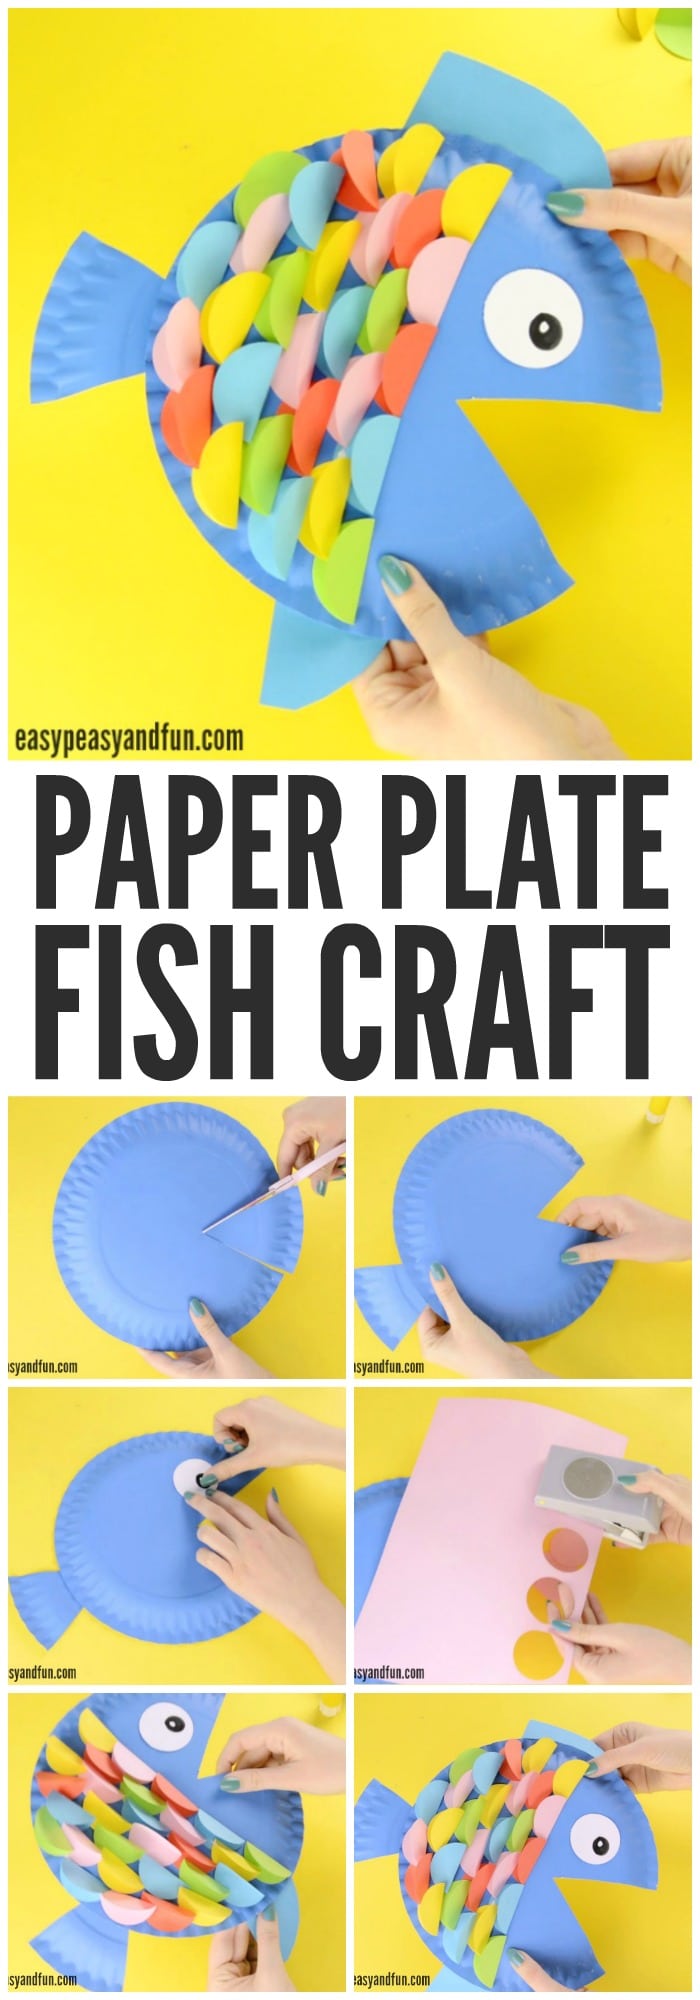 Cute Paper Plate Fish Craft for Kids to Make